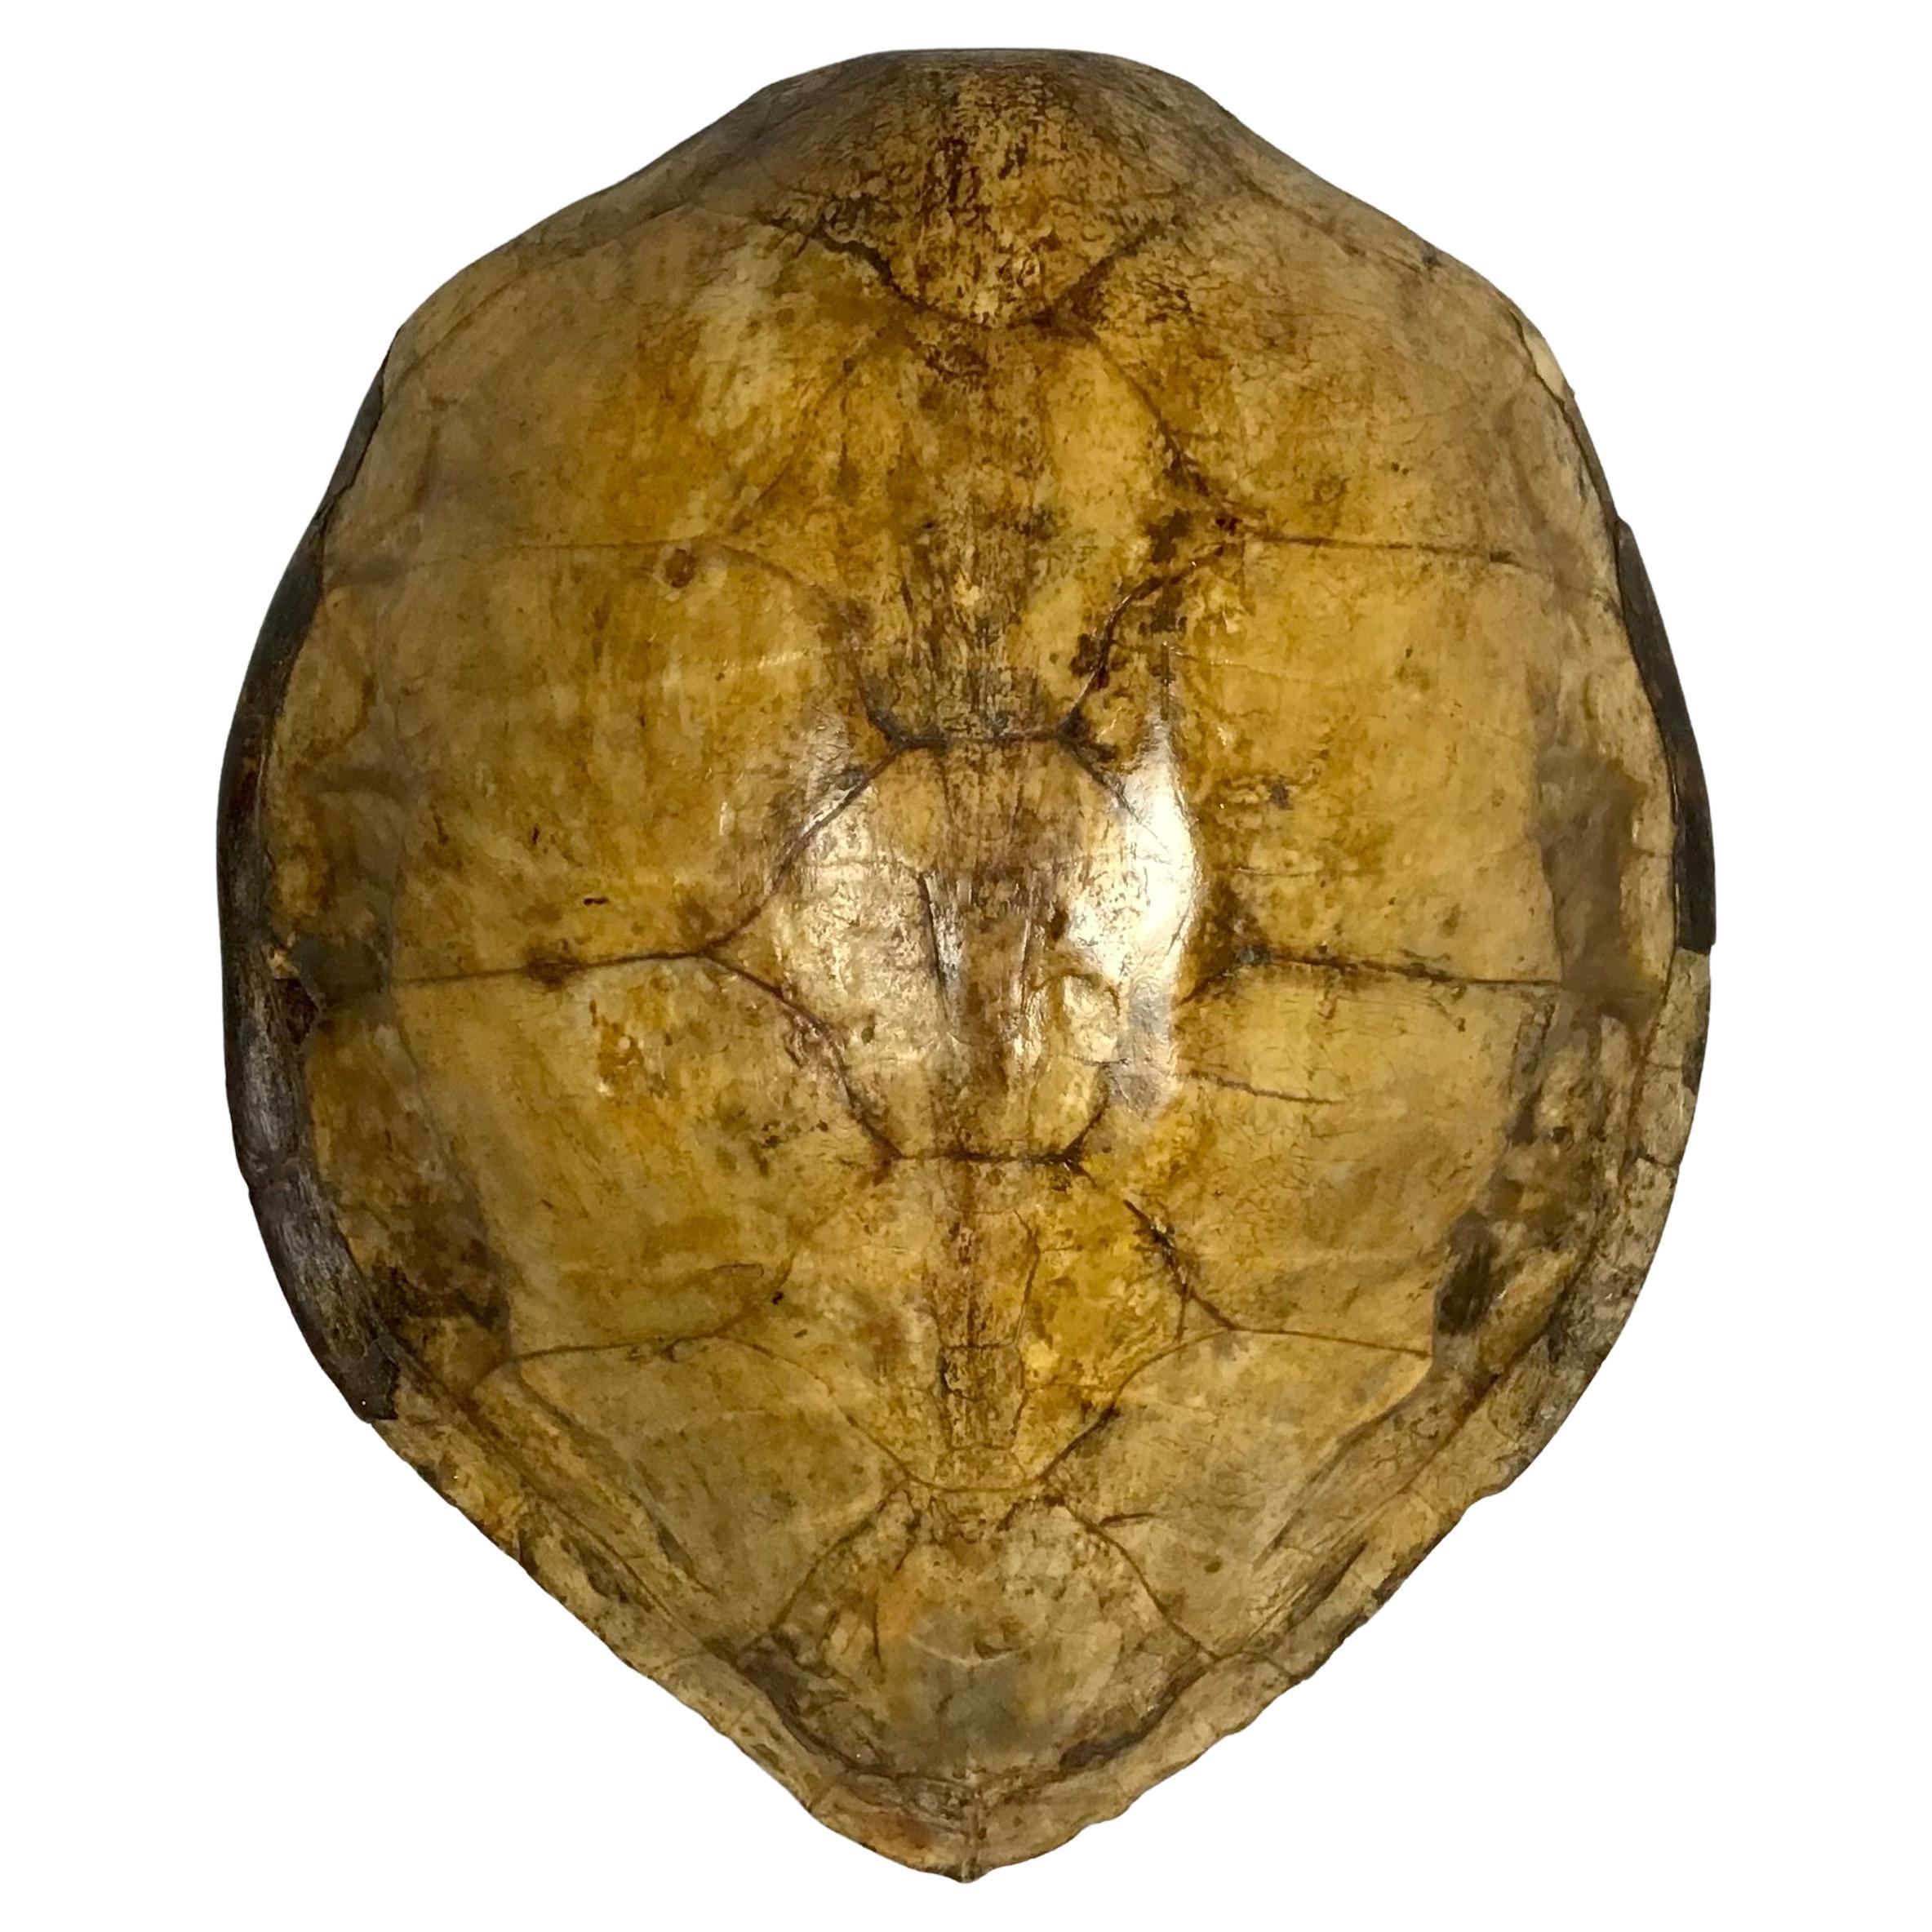 Giant Antique Turtle Carapace or Shell